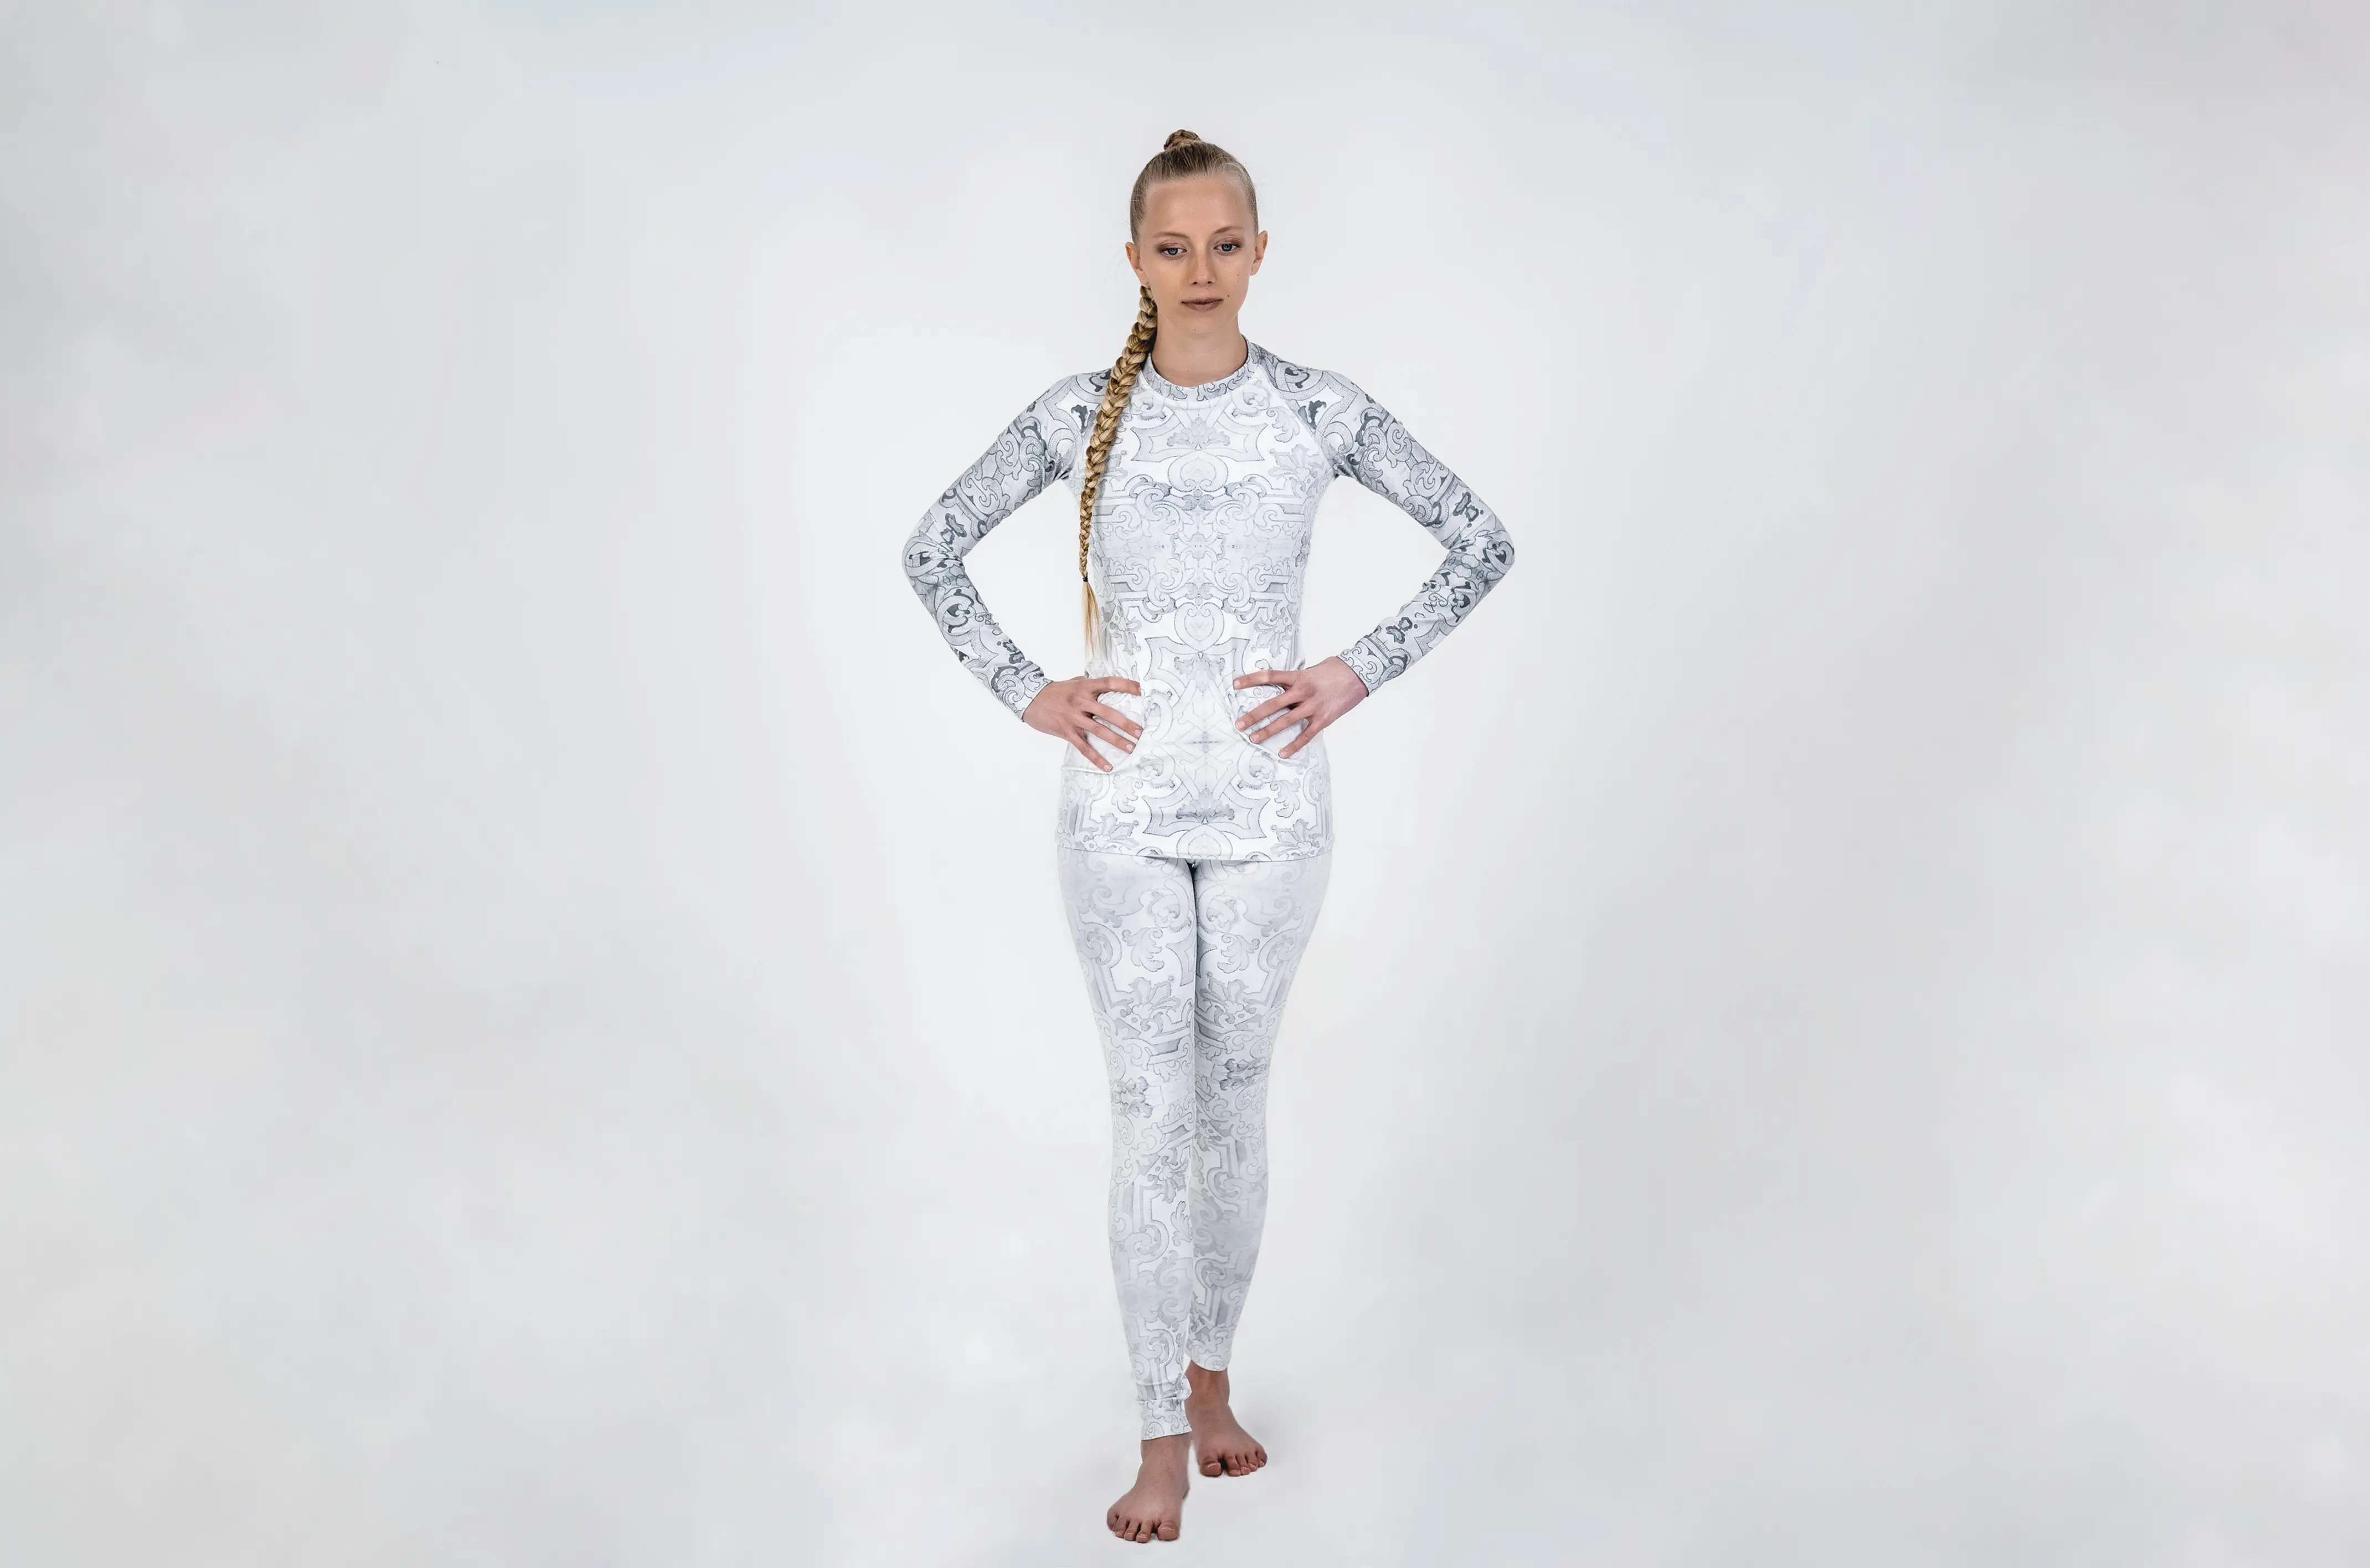 Model posing with white patterned rash guard and leggings.